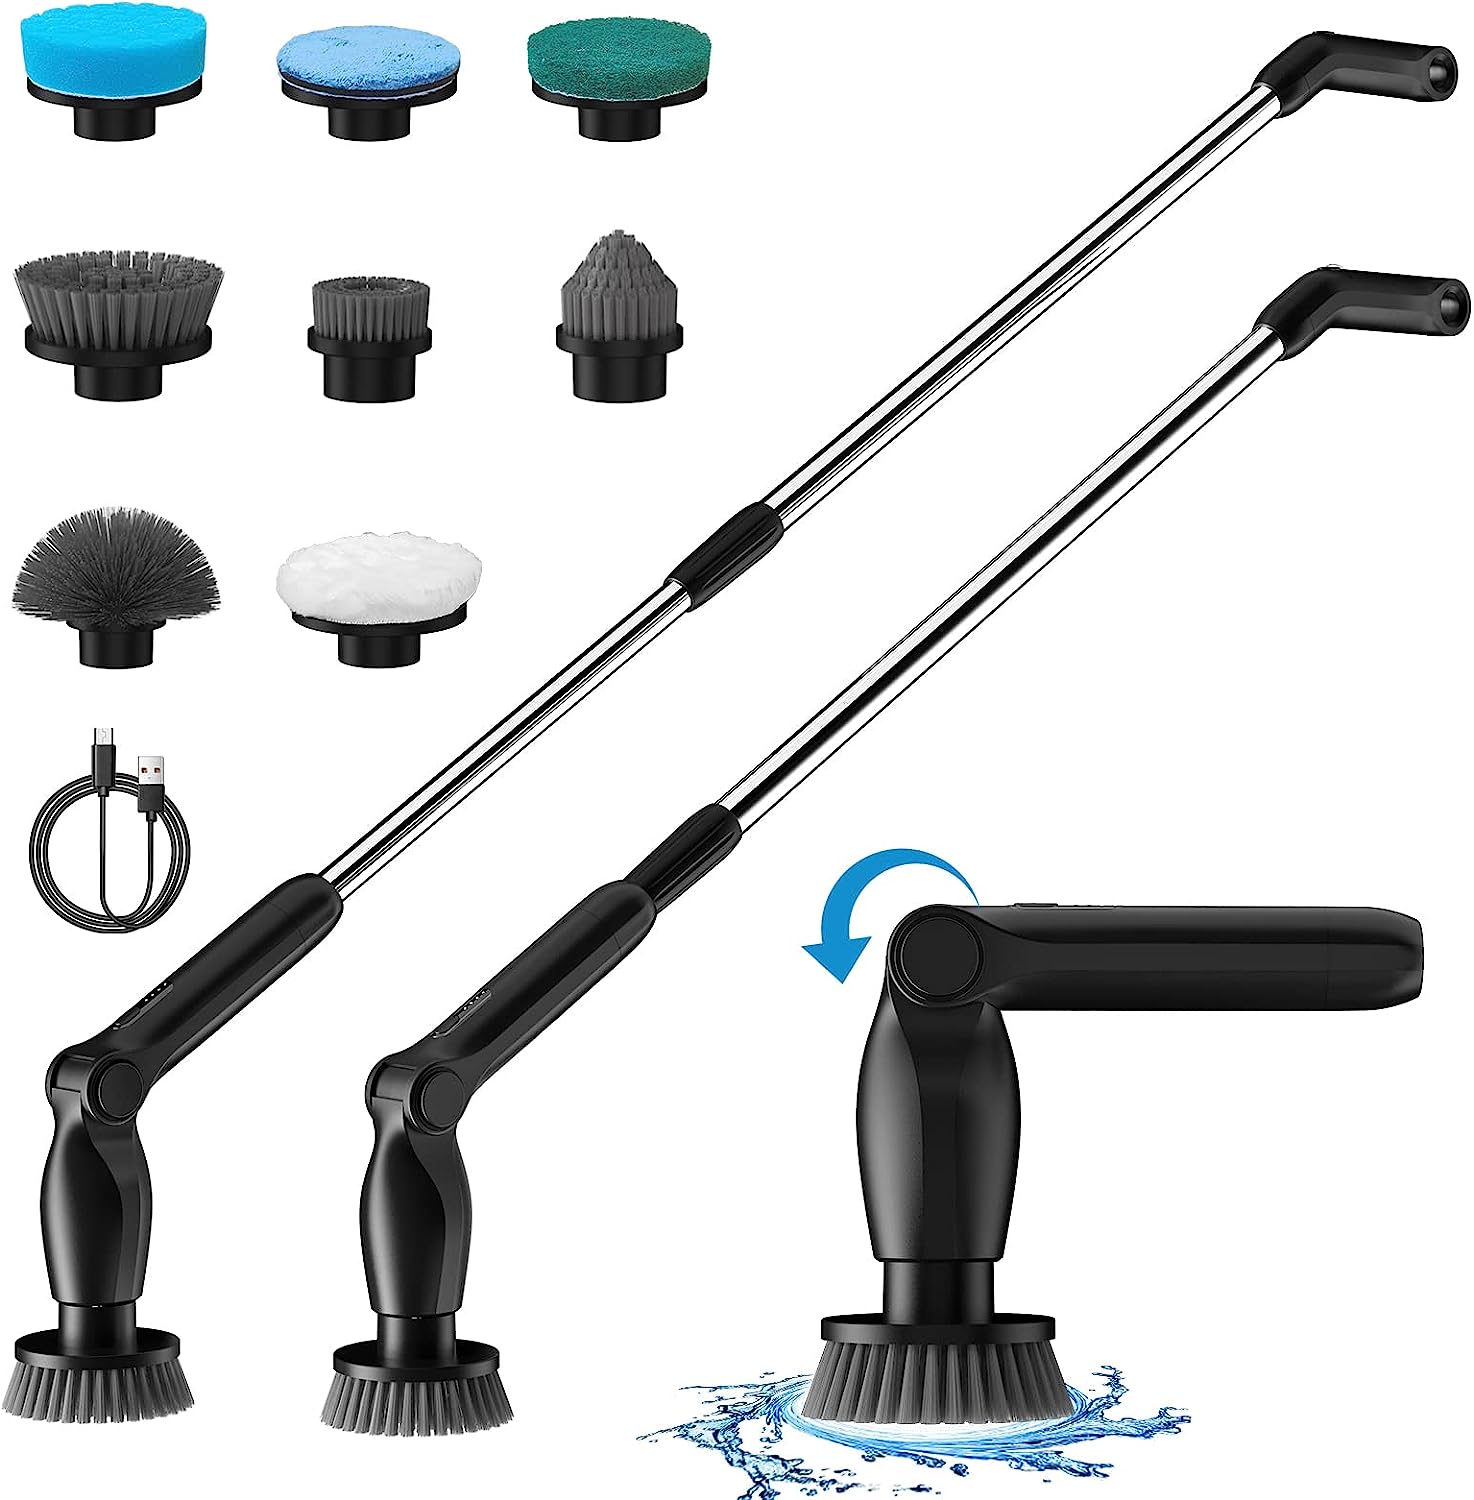 Electric Spin Scrubber,Cordless Scrubber Cleaning Brush with 7 Replaceable  Brush Heads,2 Speeds Power Scrubber Brush for  Bathroom,Tub,Floor,Car,Tile,Black 